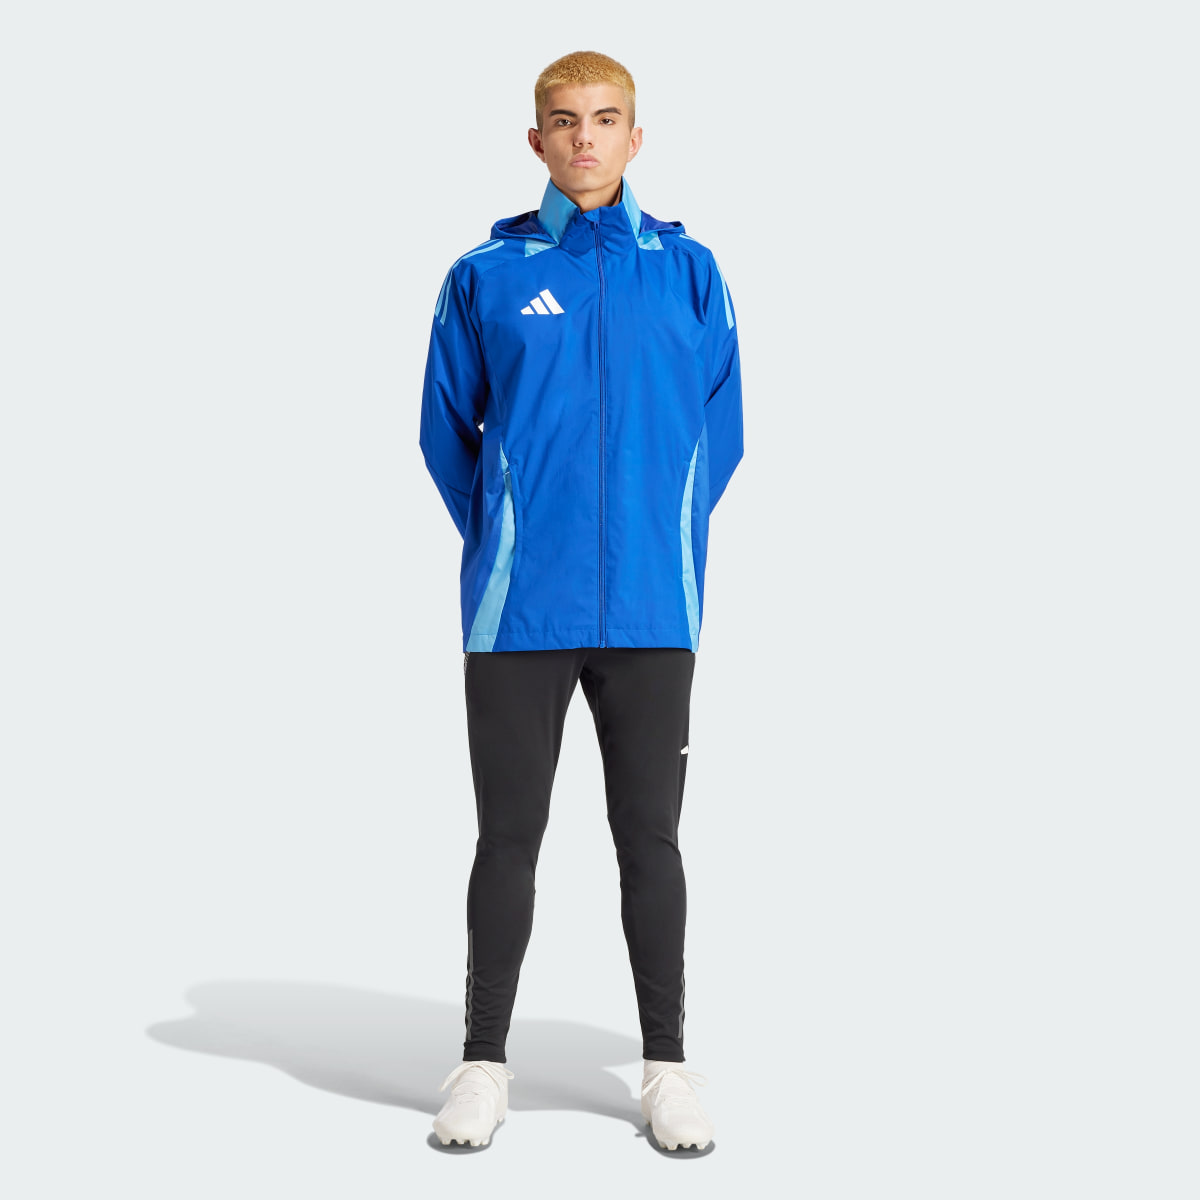 Adidas Tiro 24 Competition All-Weather Jacket. 6